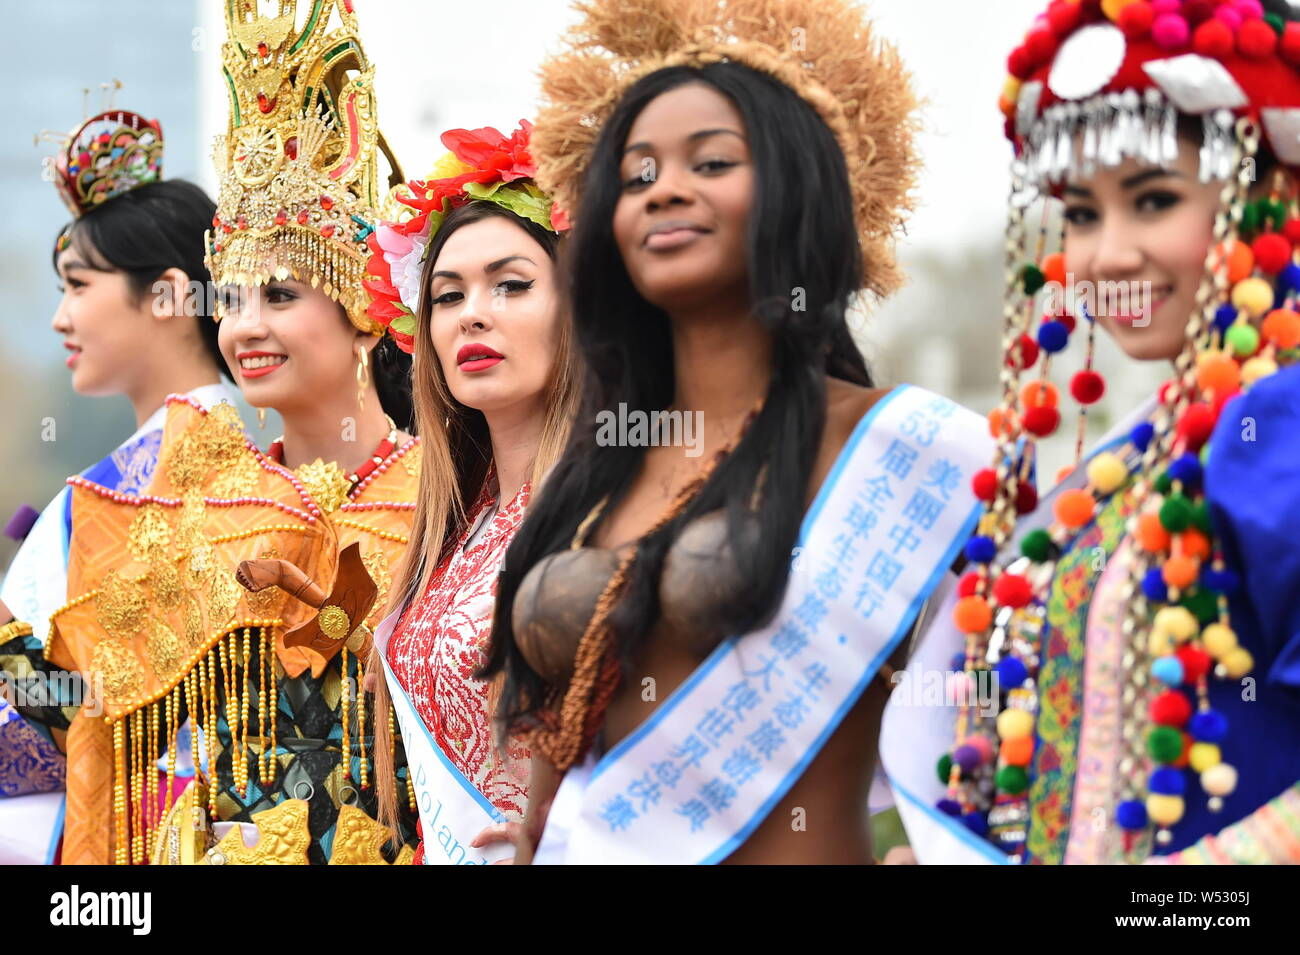 Contestants dressed in traditional costumes take part in an outdoor photo session for the 53th Miss All Nationsl Pageant in Nanjing city, east China's Stock Photo